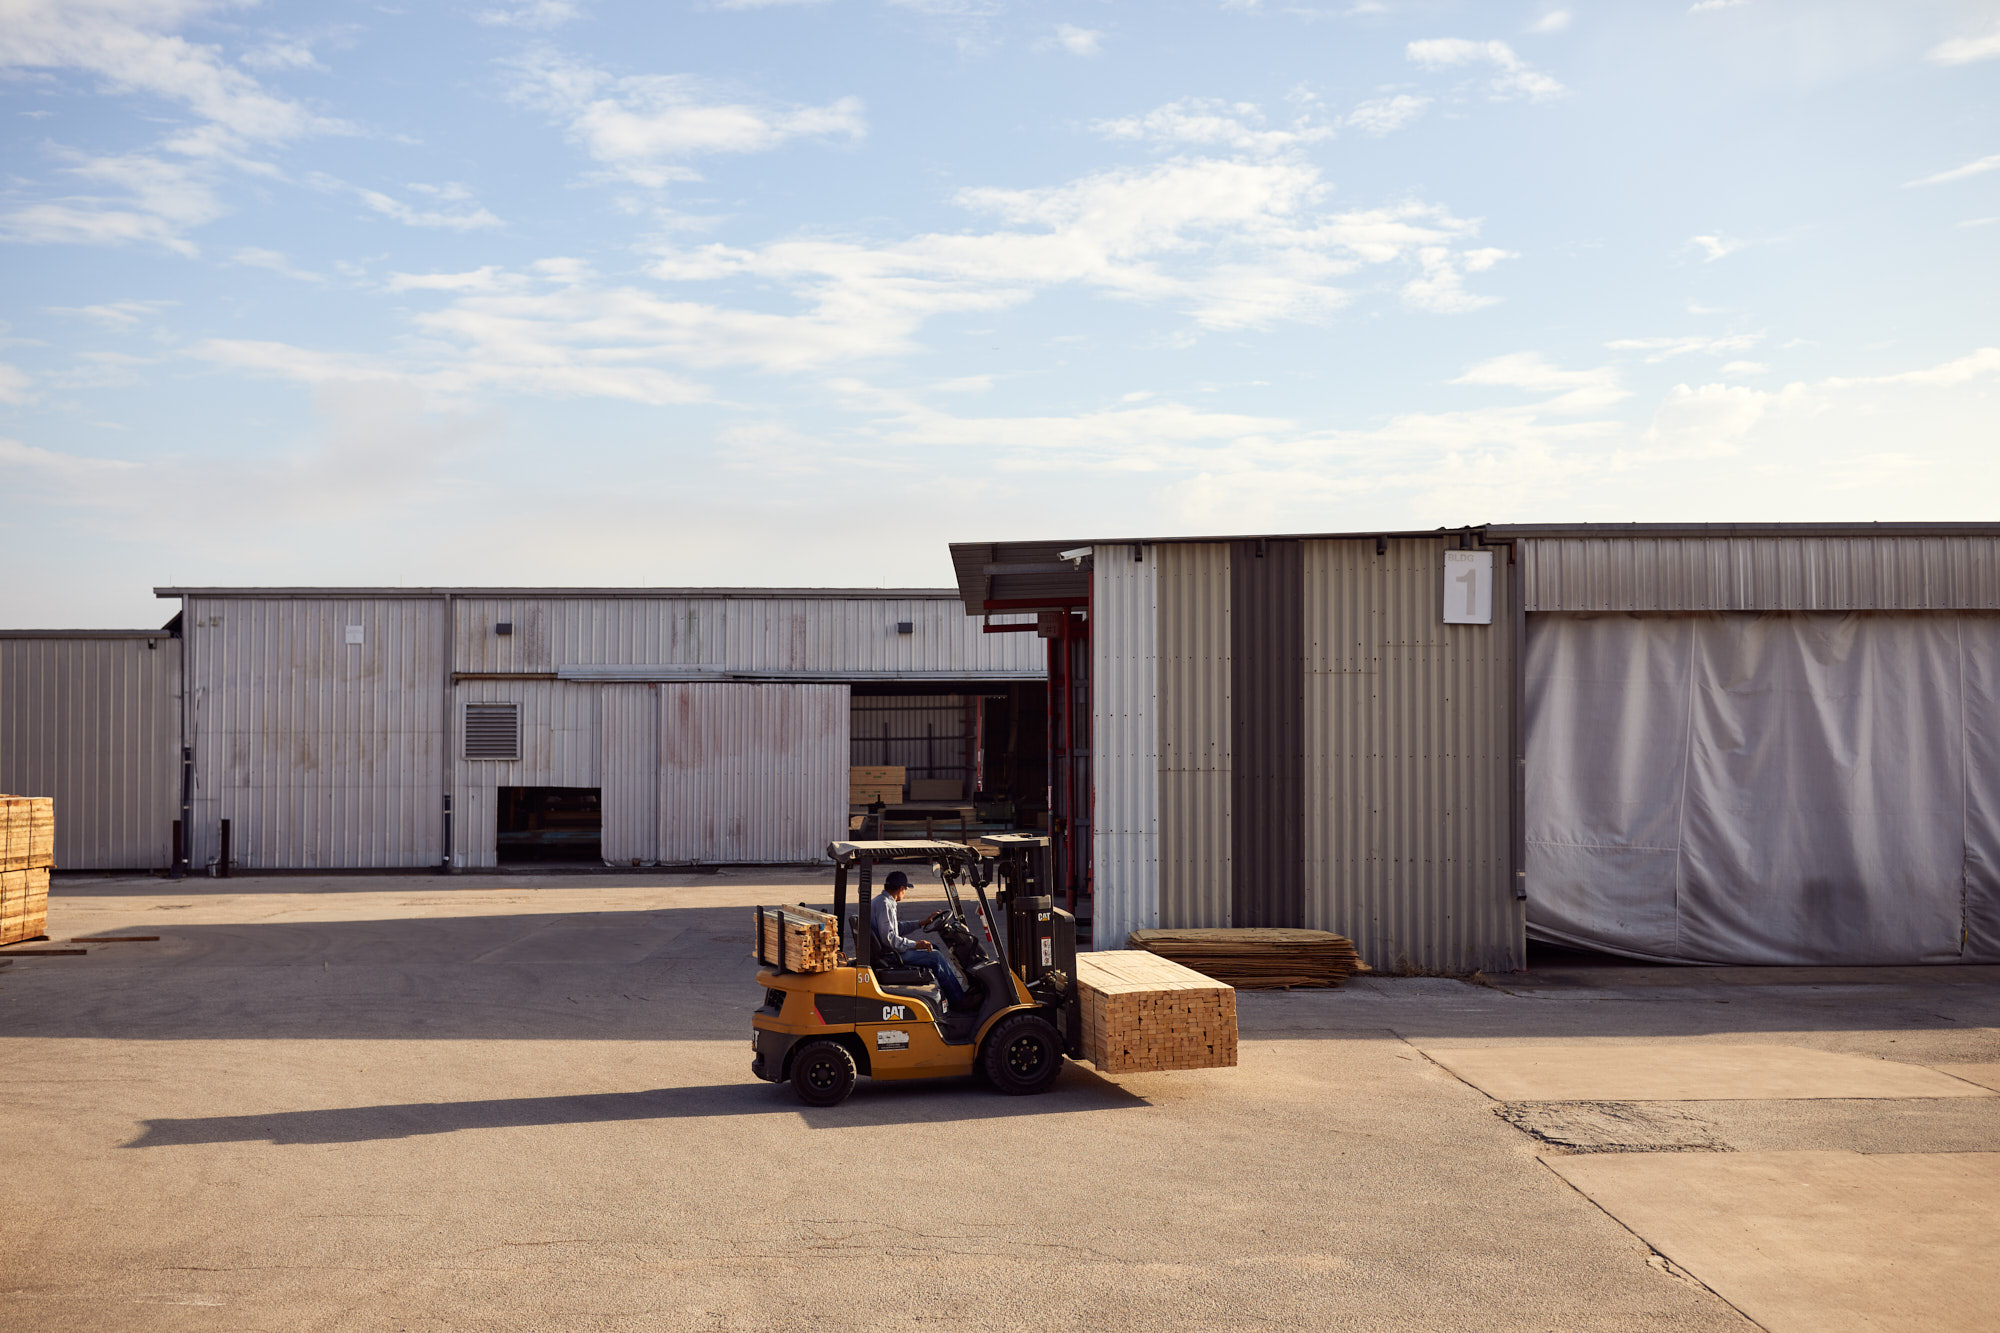 Forklift and Lumber Yard| Industrial Photography